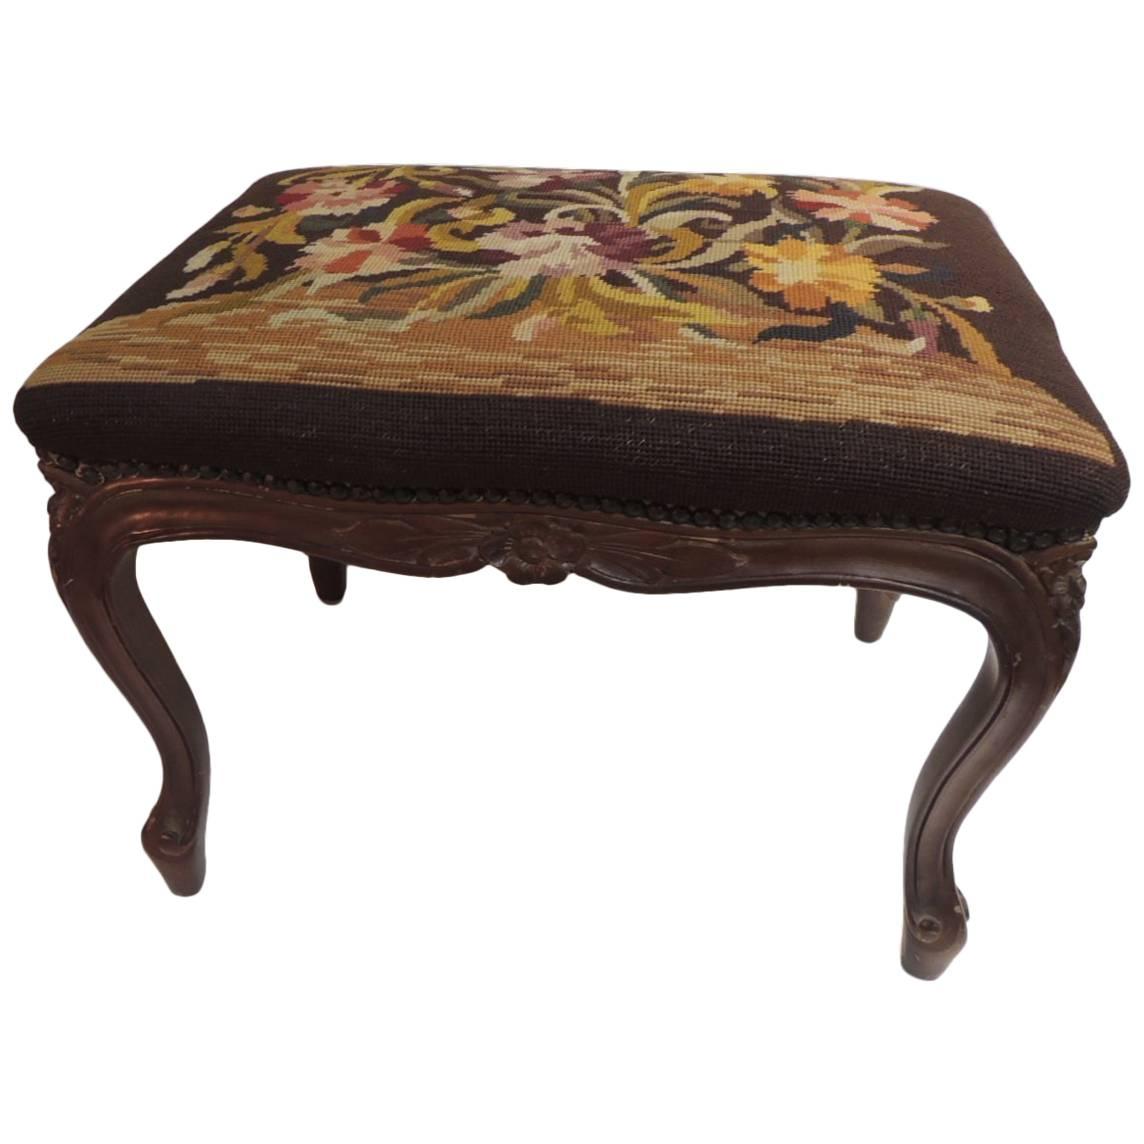 English Floral Tapestry Carved Wood Ottoman